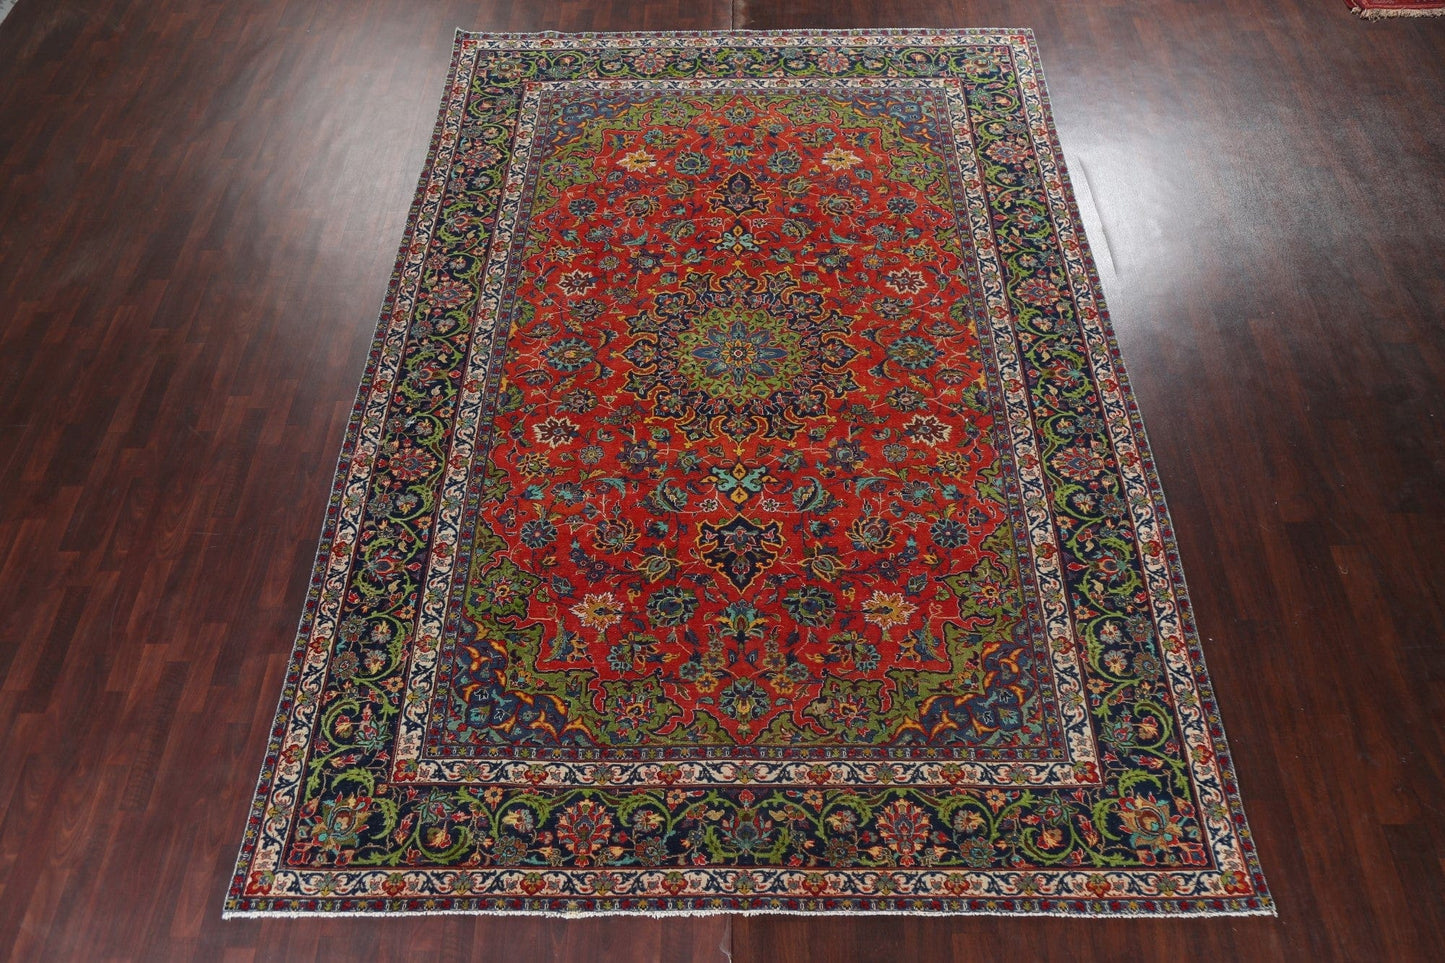 Vintage Red Najafabad Persian Area Rug 9x13